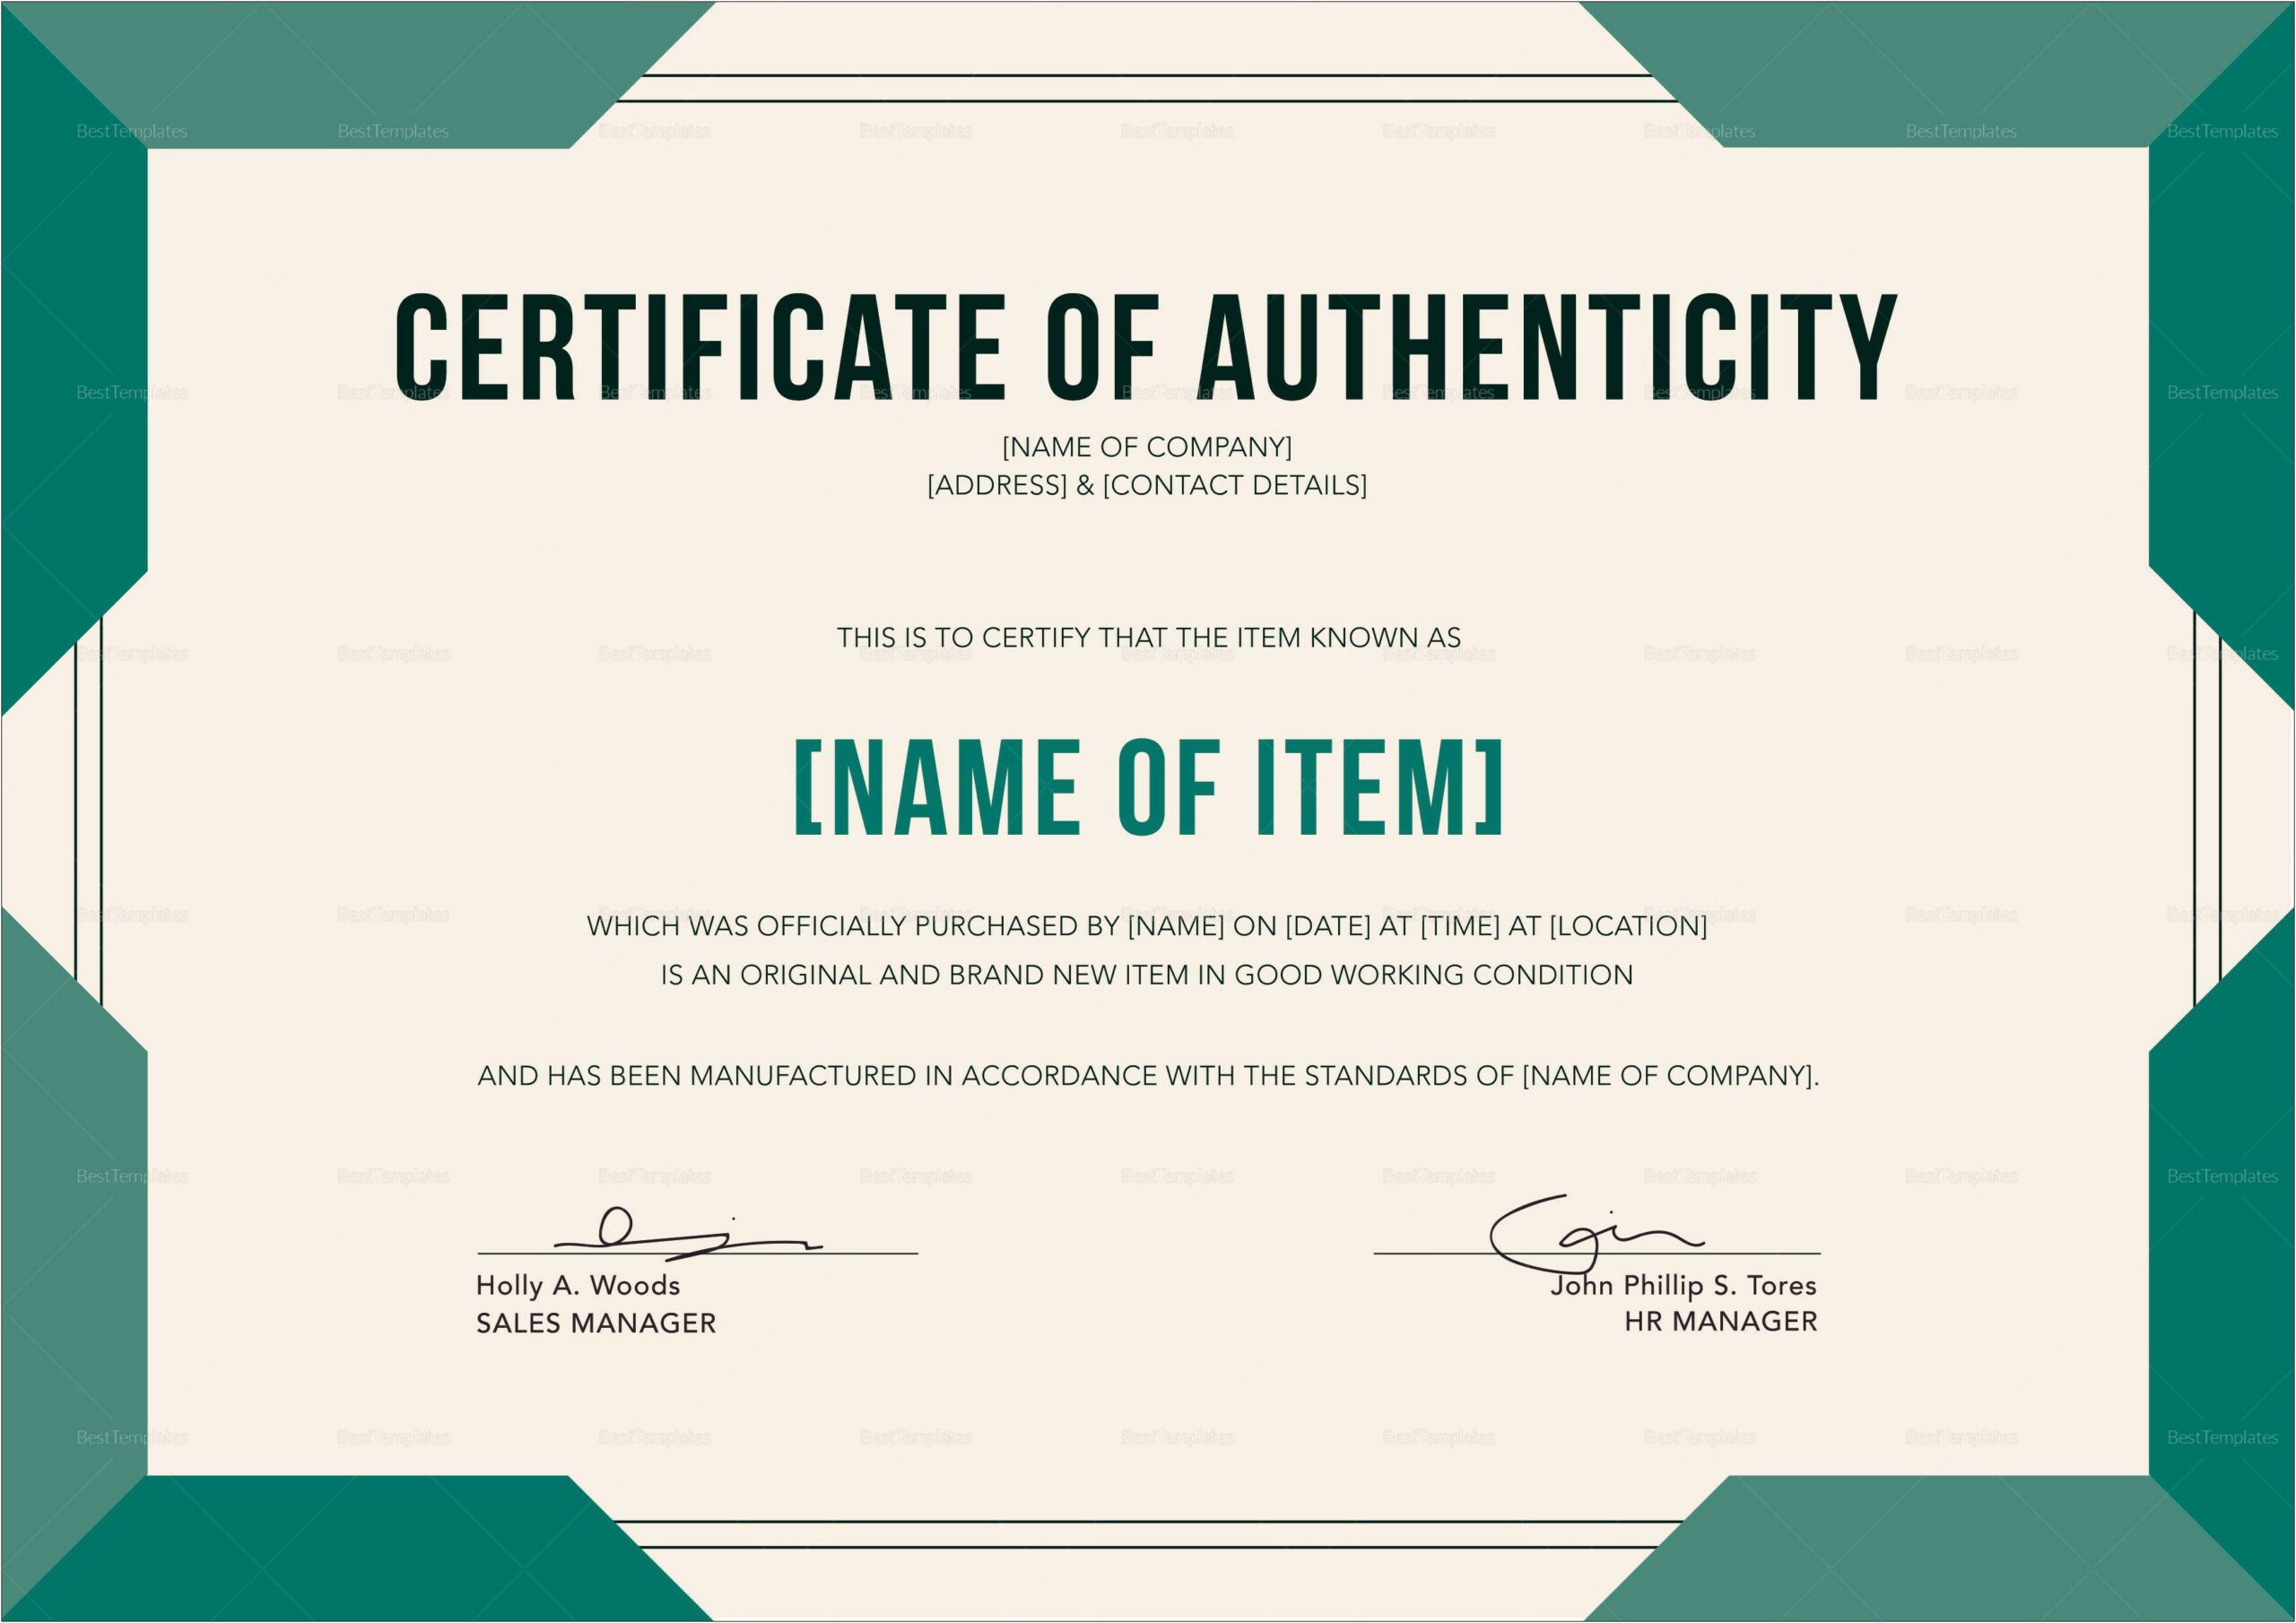 Microsoft Word Certificate Of Authenticity Template